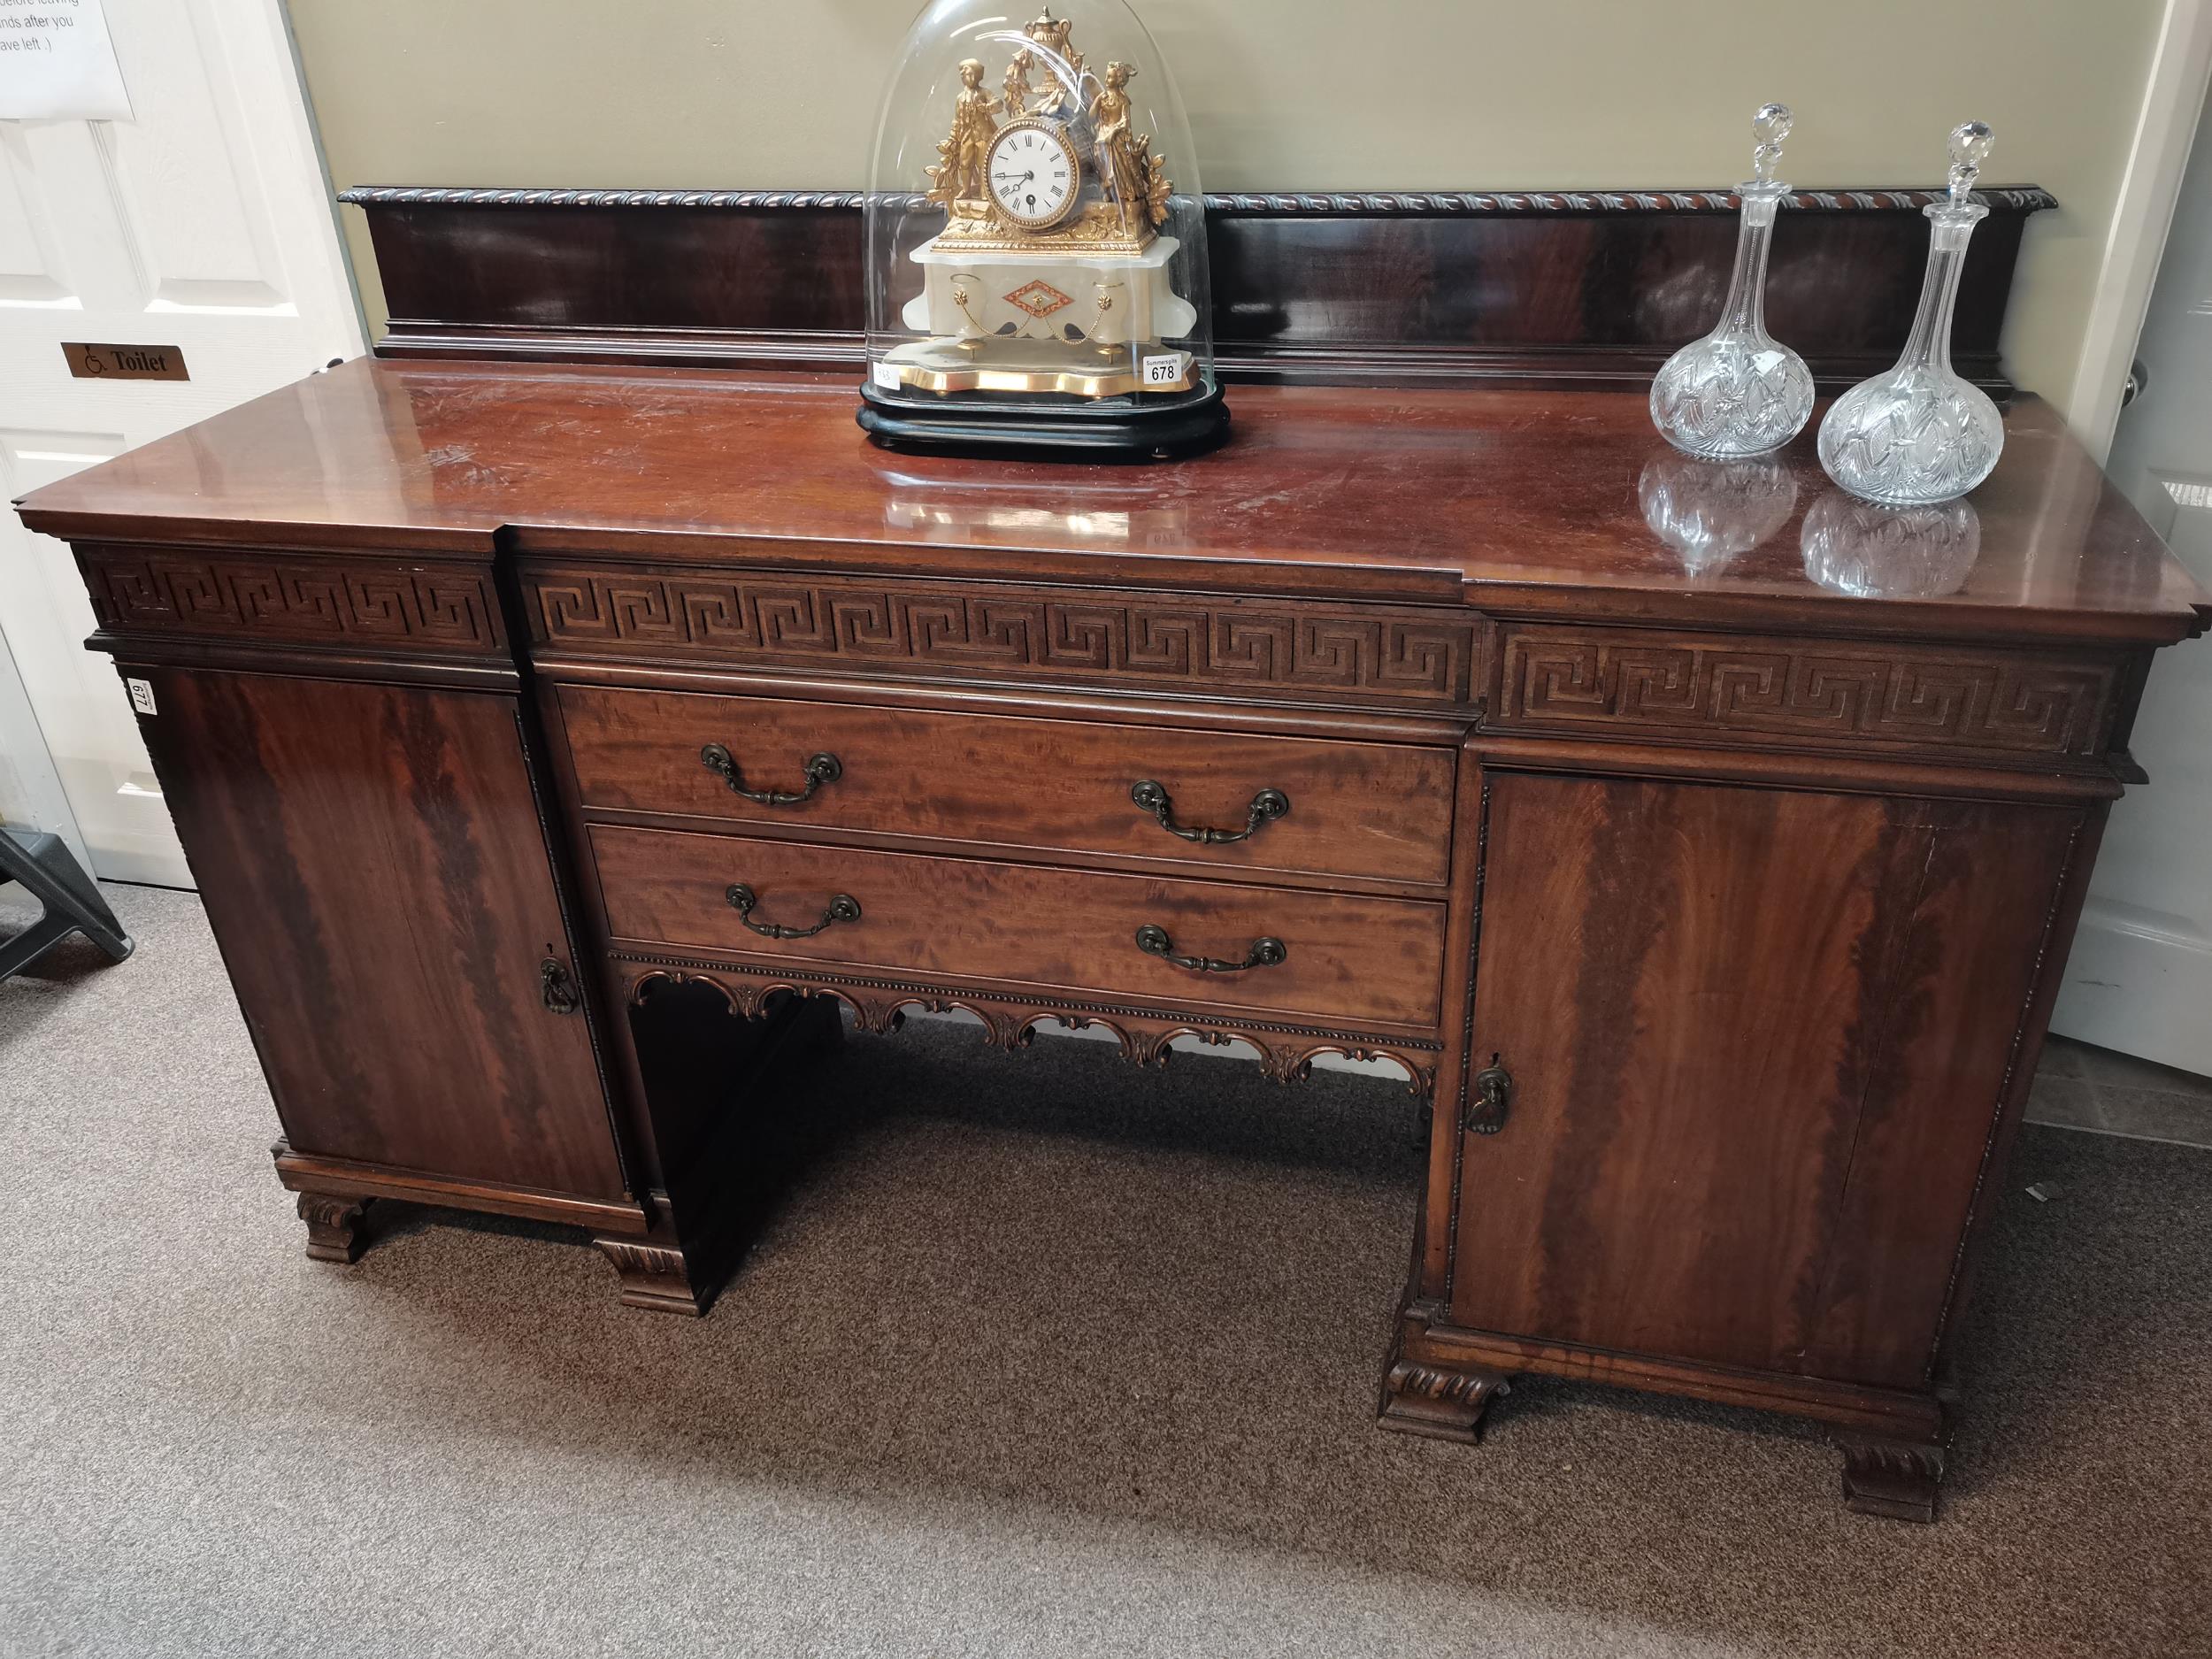 Mahogany Chippendale style 1.9m long sideboard with lead wine coolerCondition StatusCondition Grade: